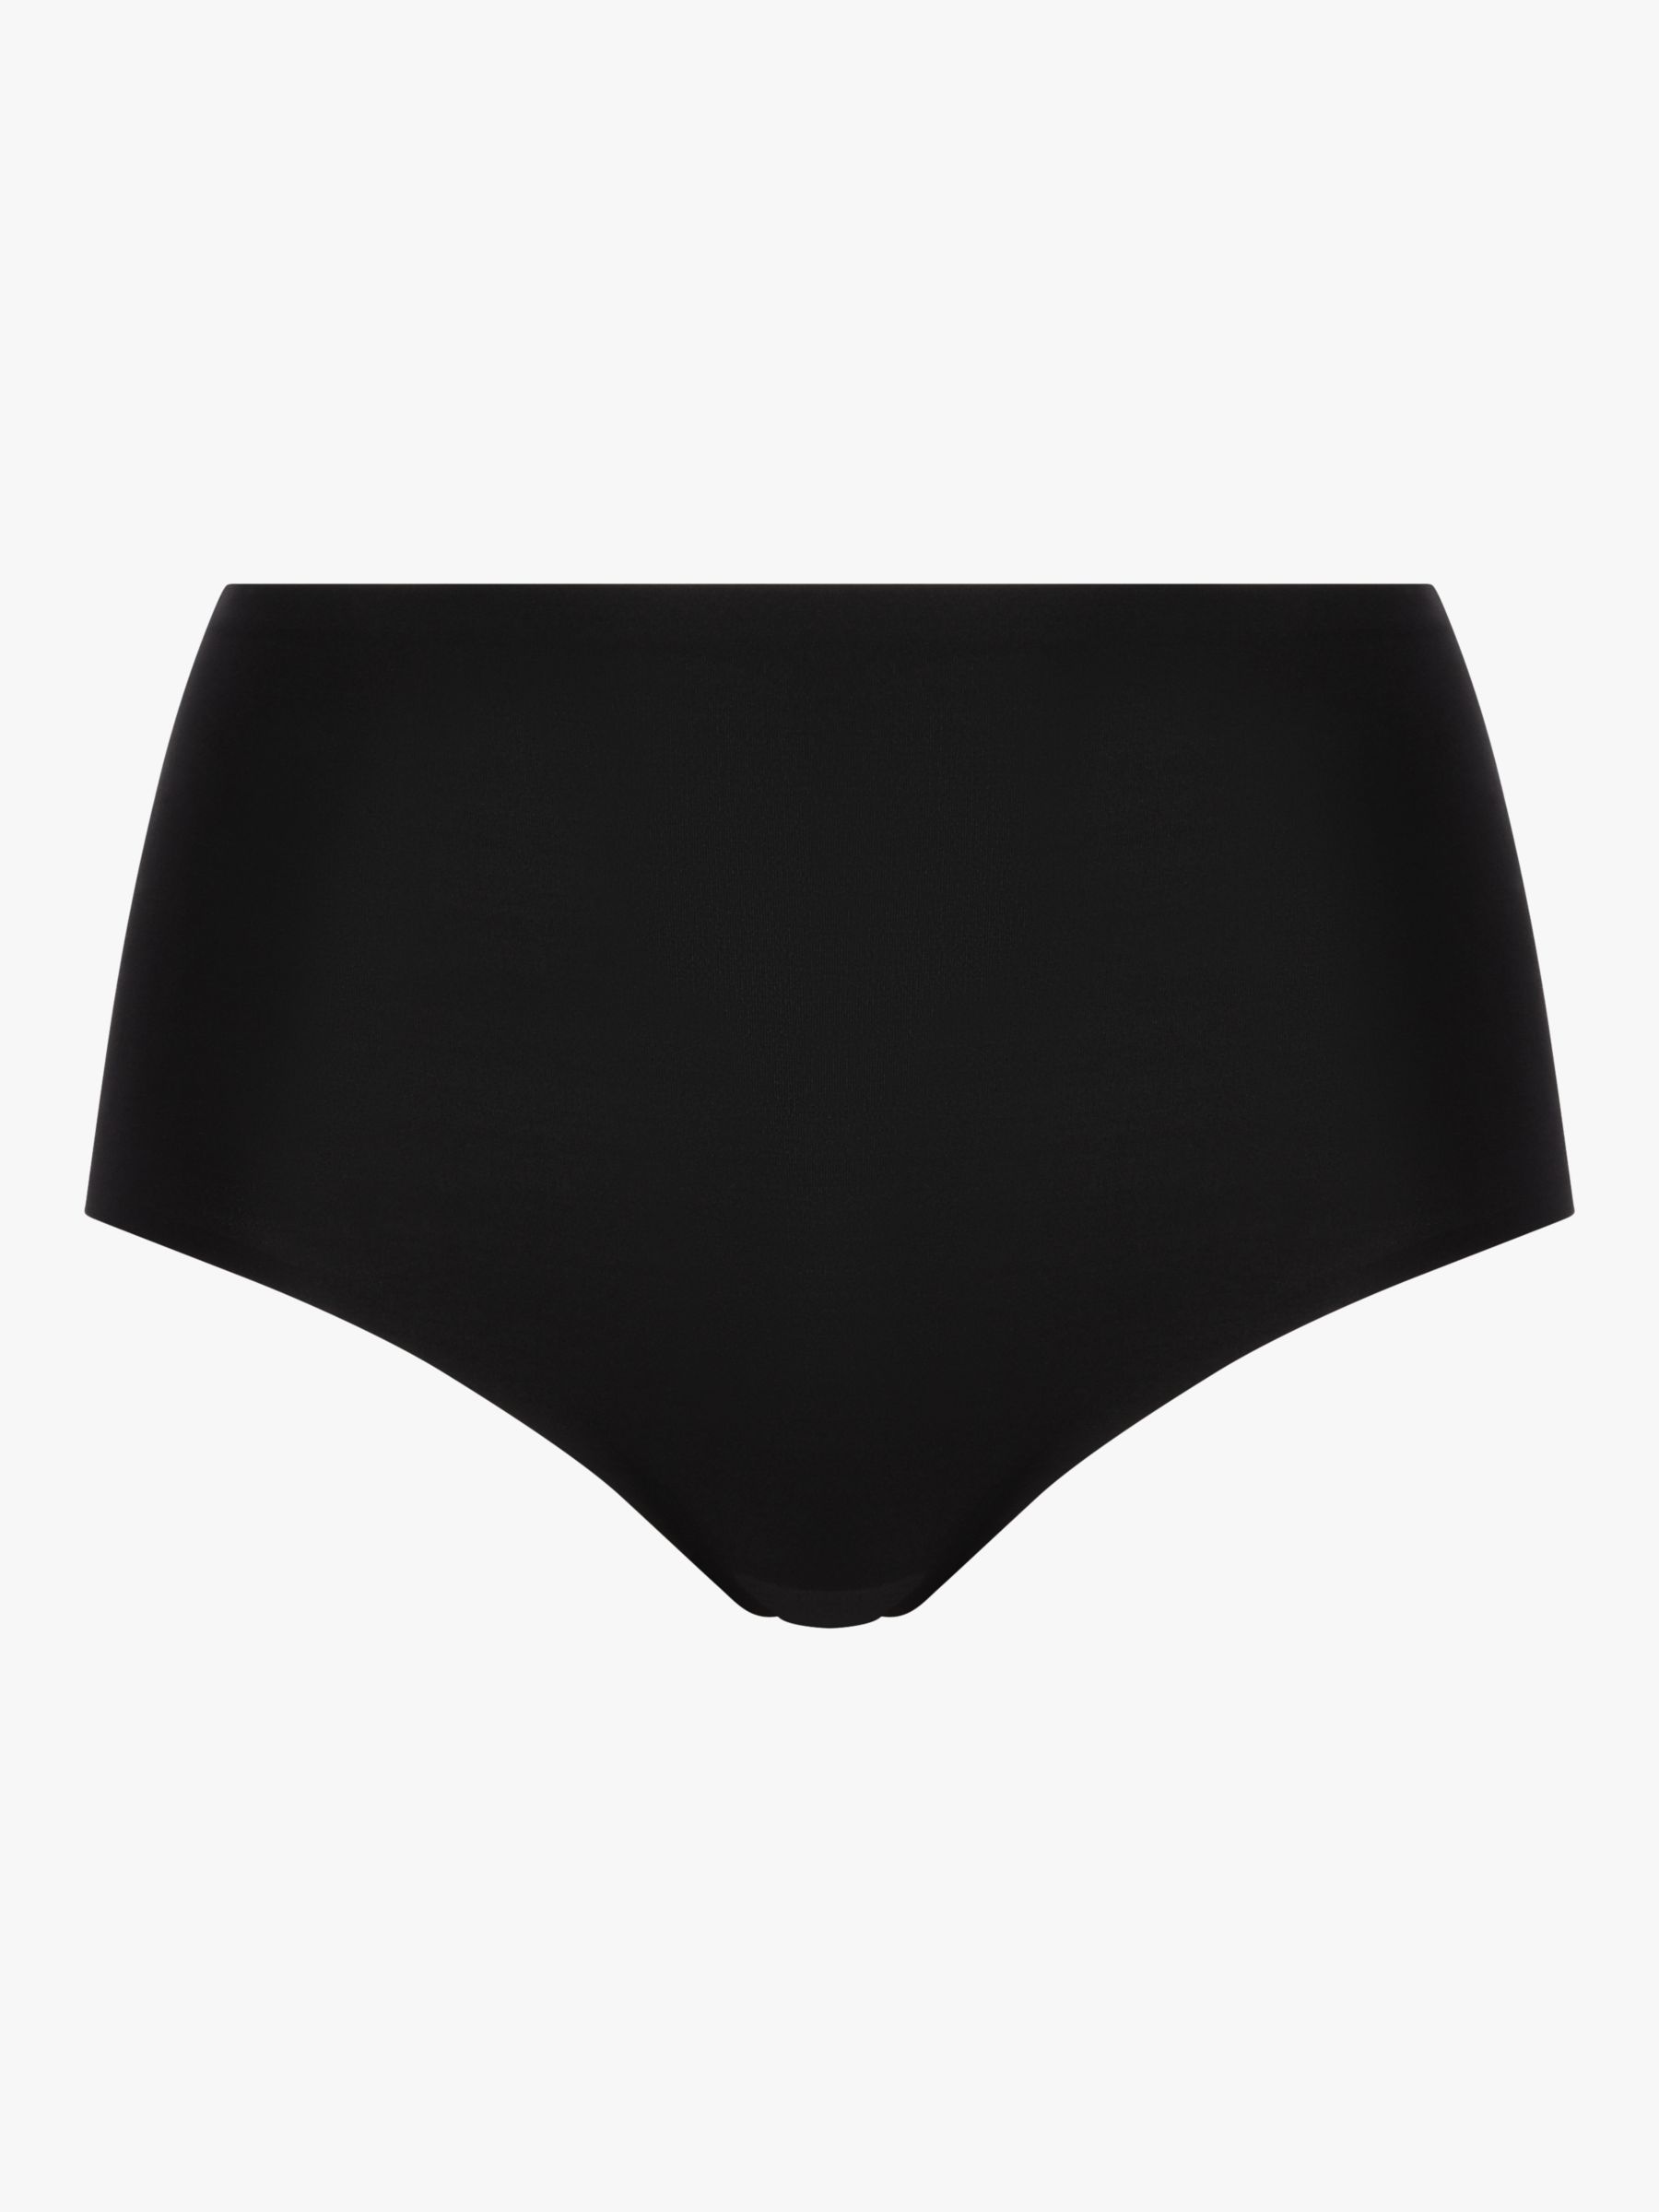 Chantelle Soft Stretch High Waisted Knickers, Black at John Lewis ...